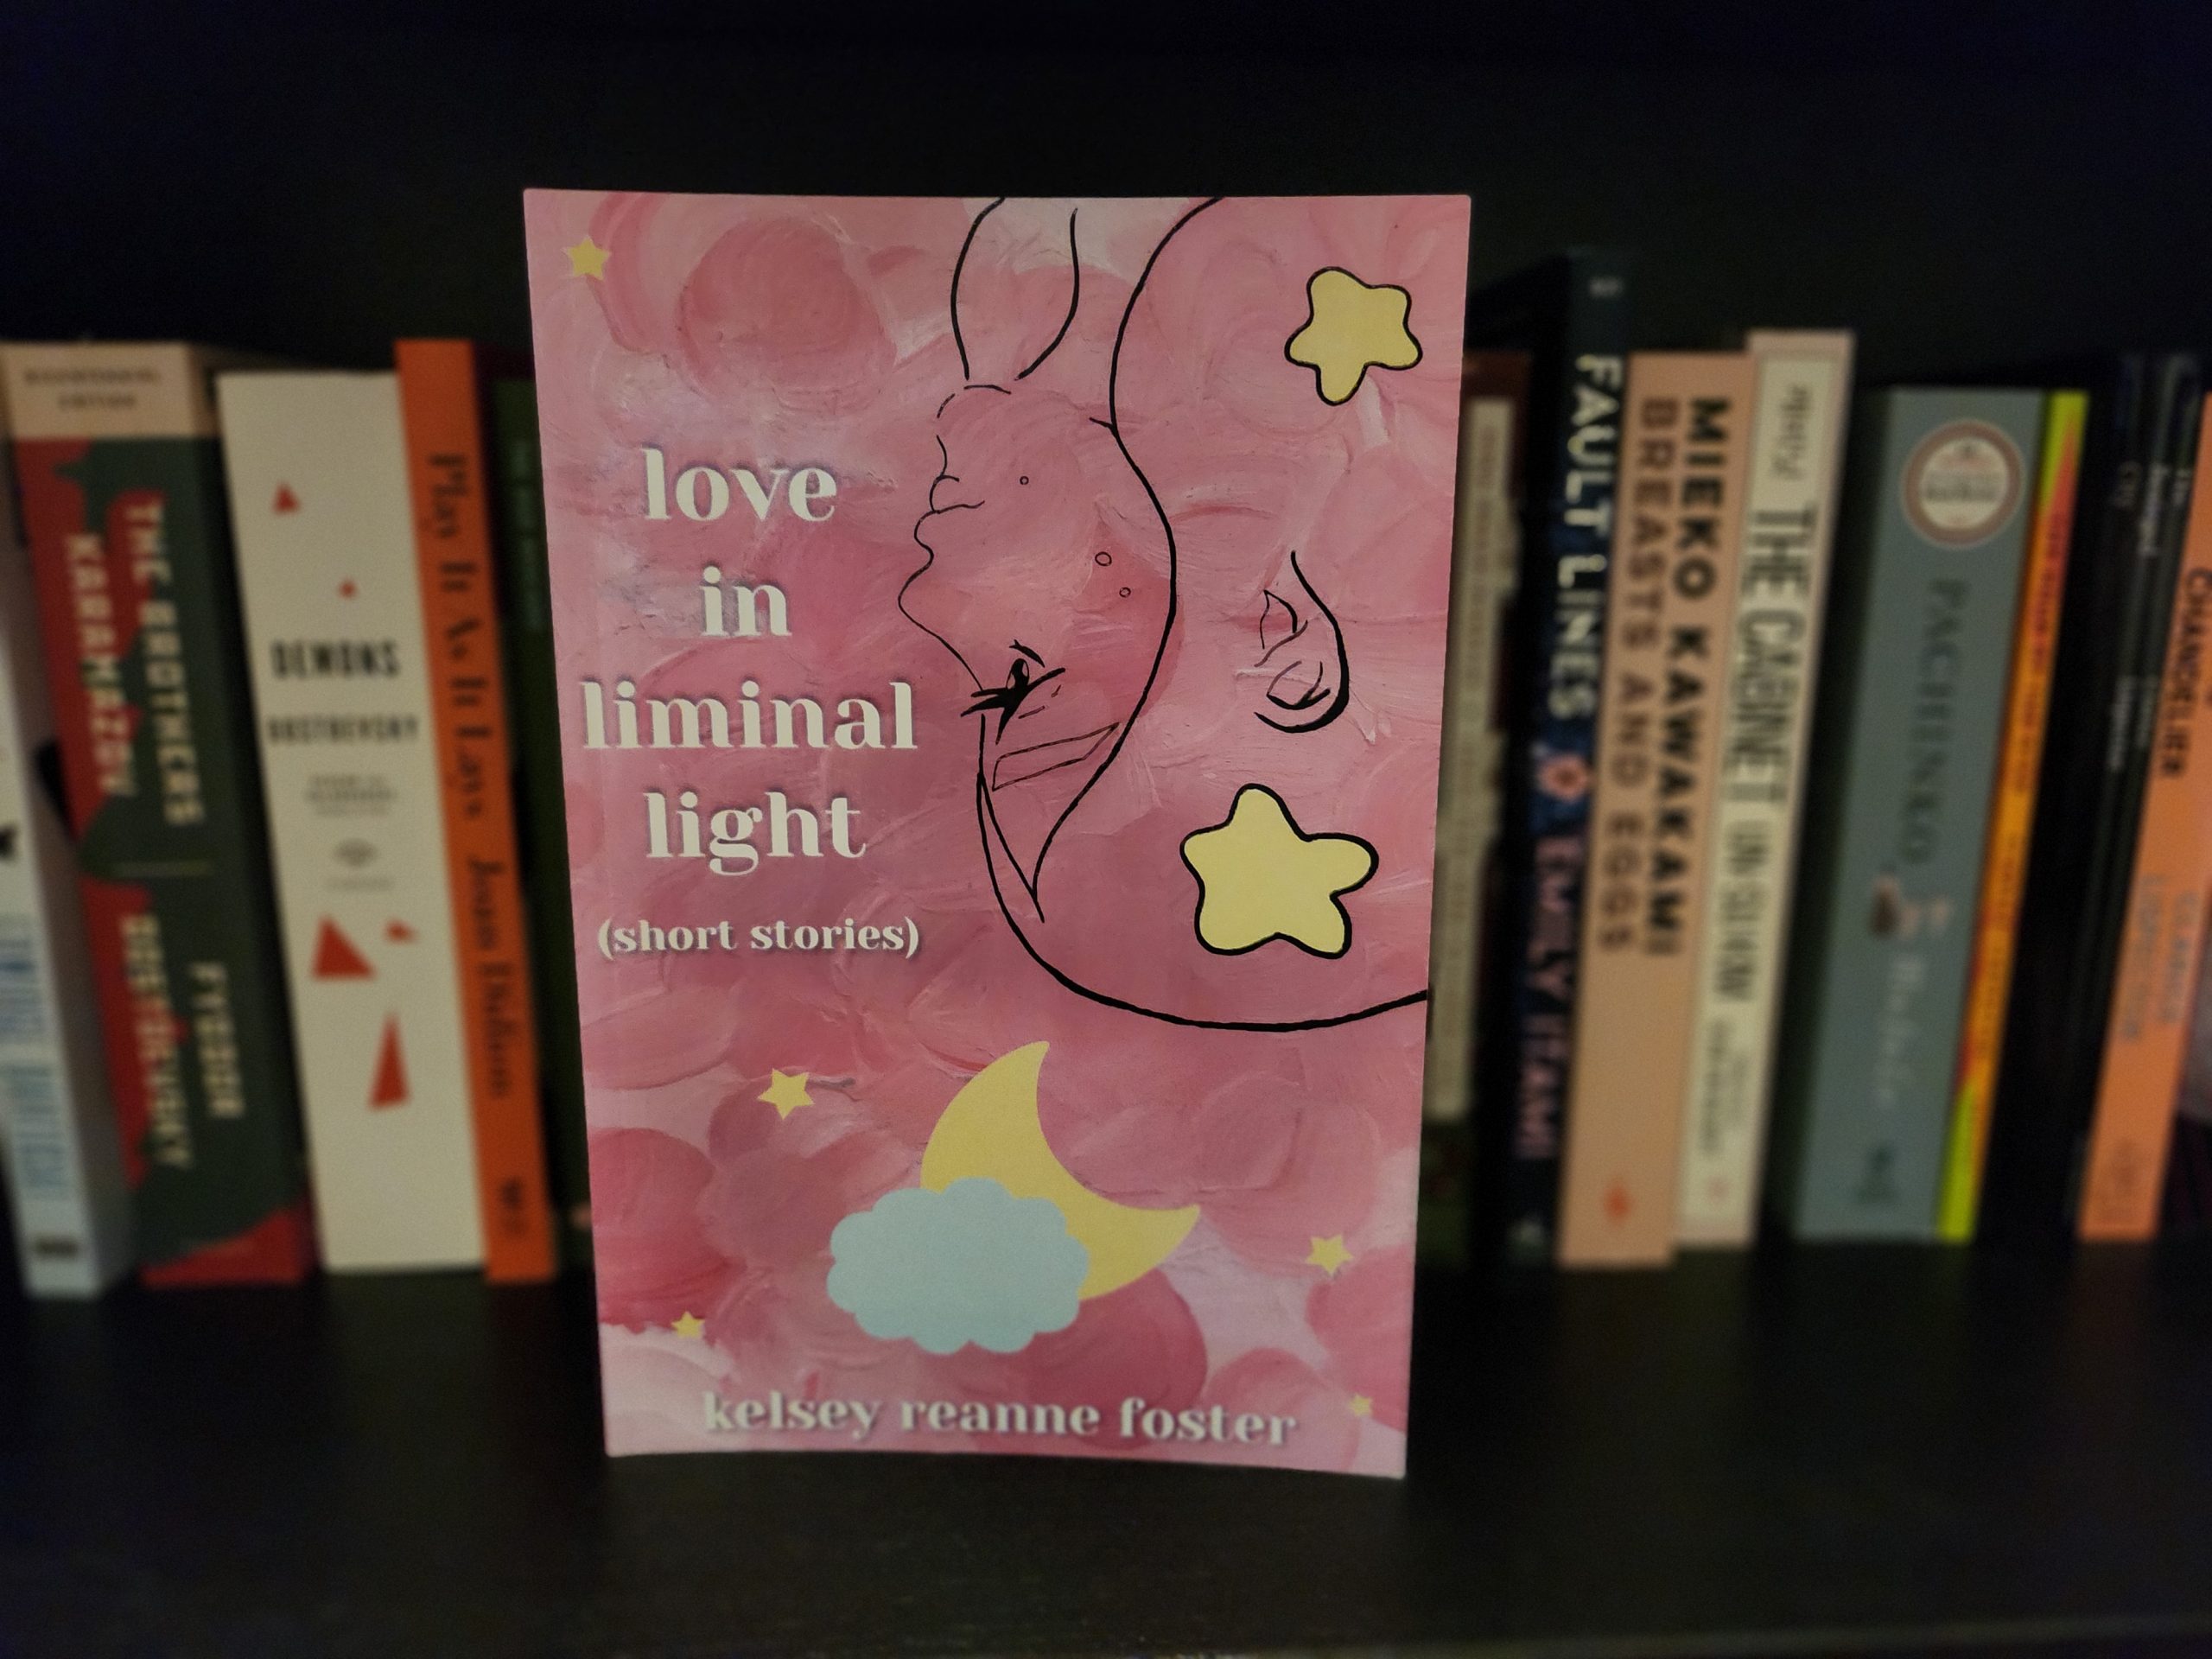 A pink book placed on a book shelf that reads: love in liminal light.